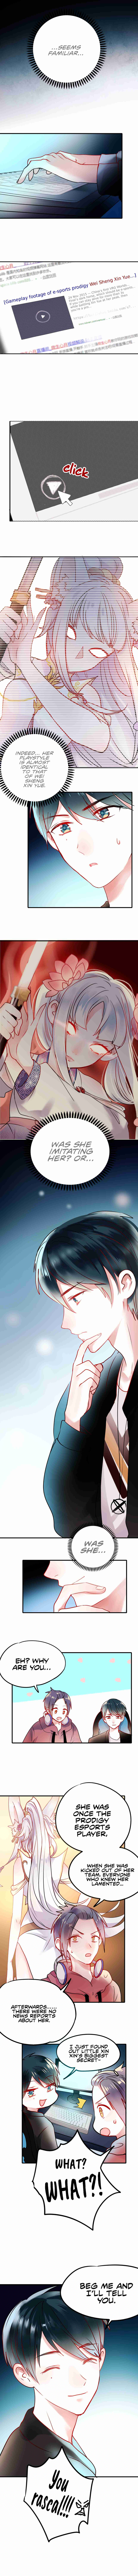 To Be Winner Ch. 7 An Identical Playstyle